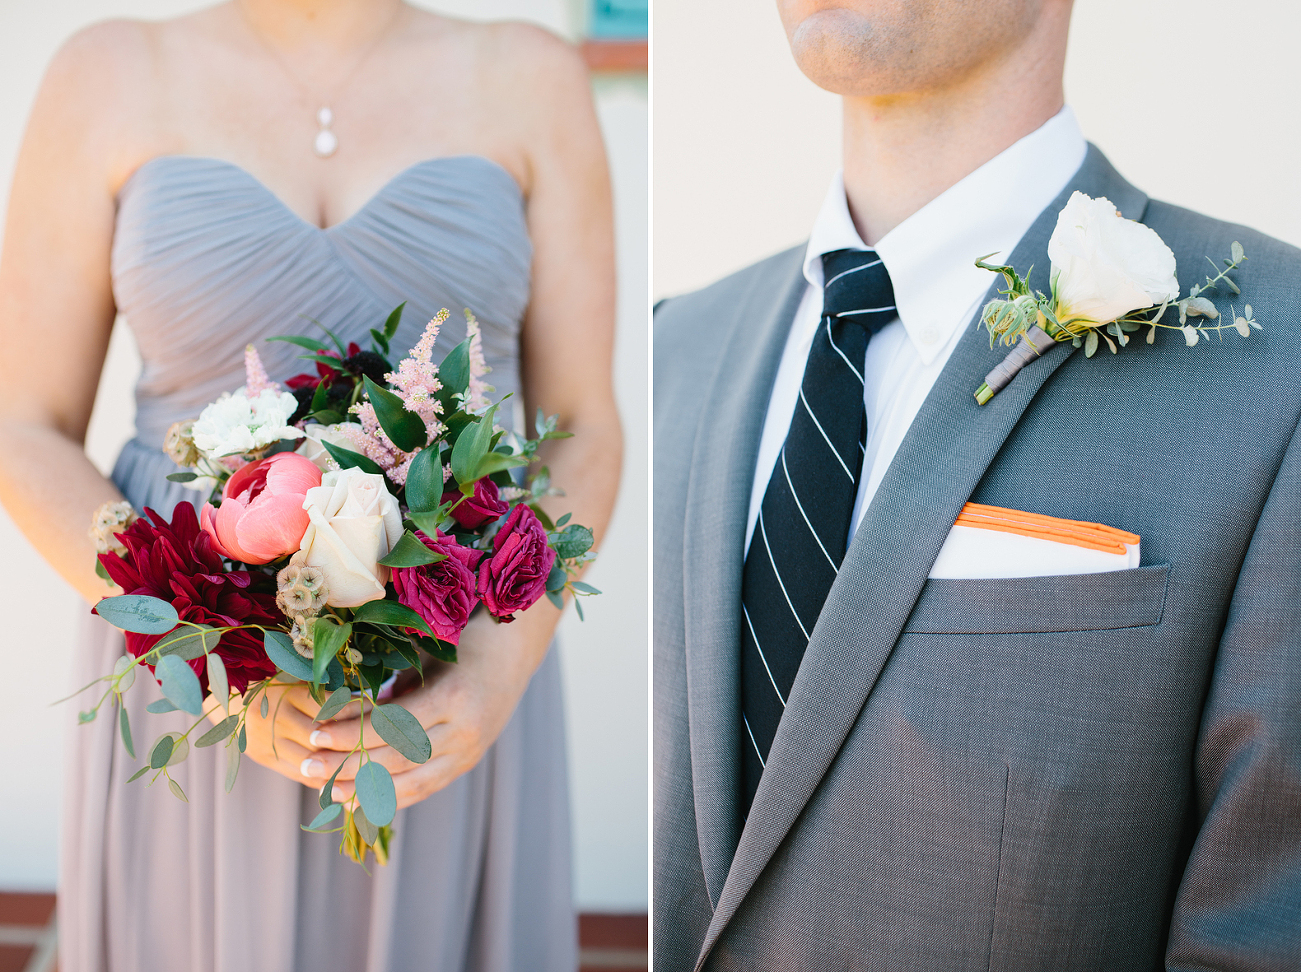 These are photos of the bridesmaid and groomsmen flowers.